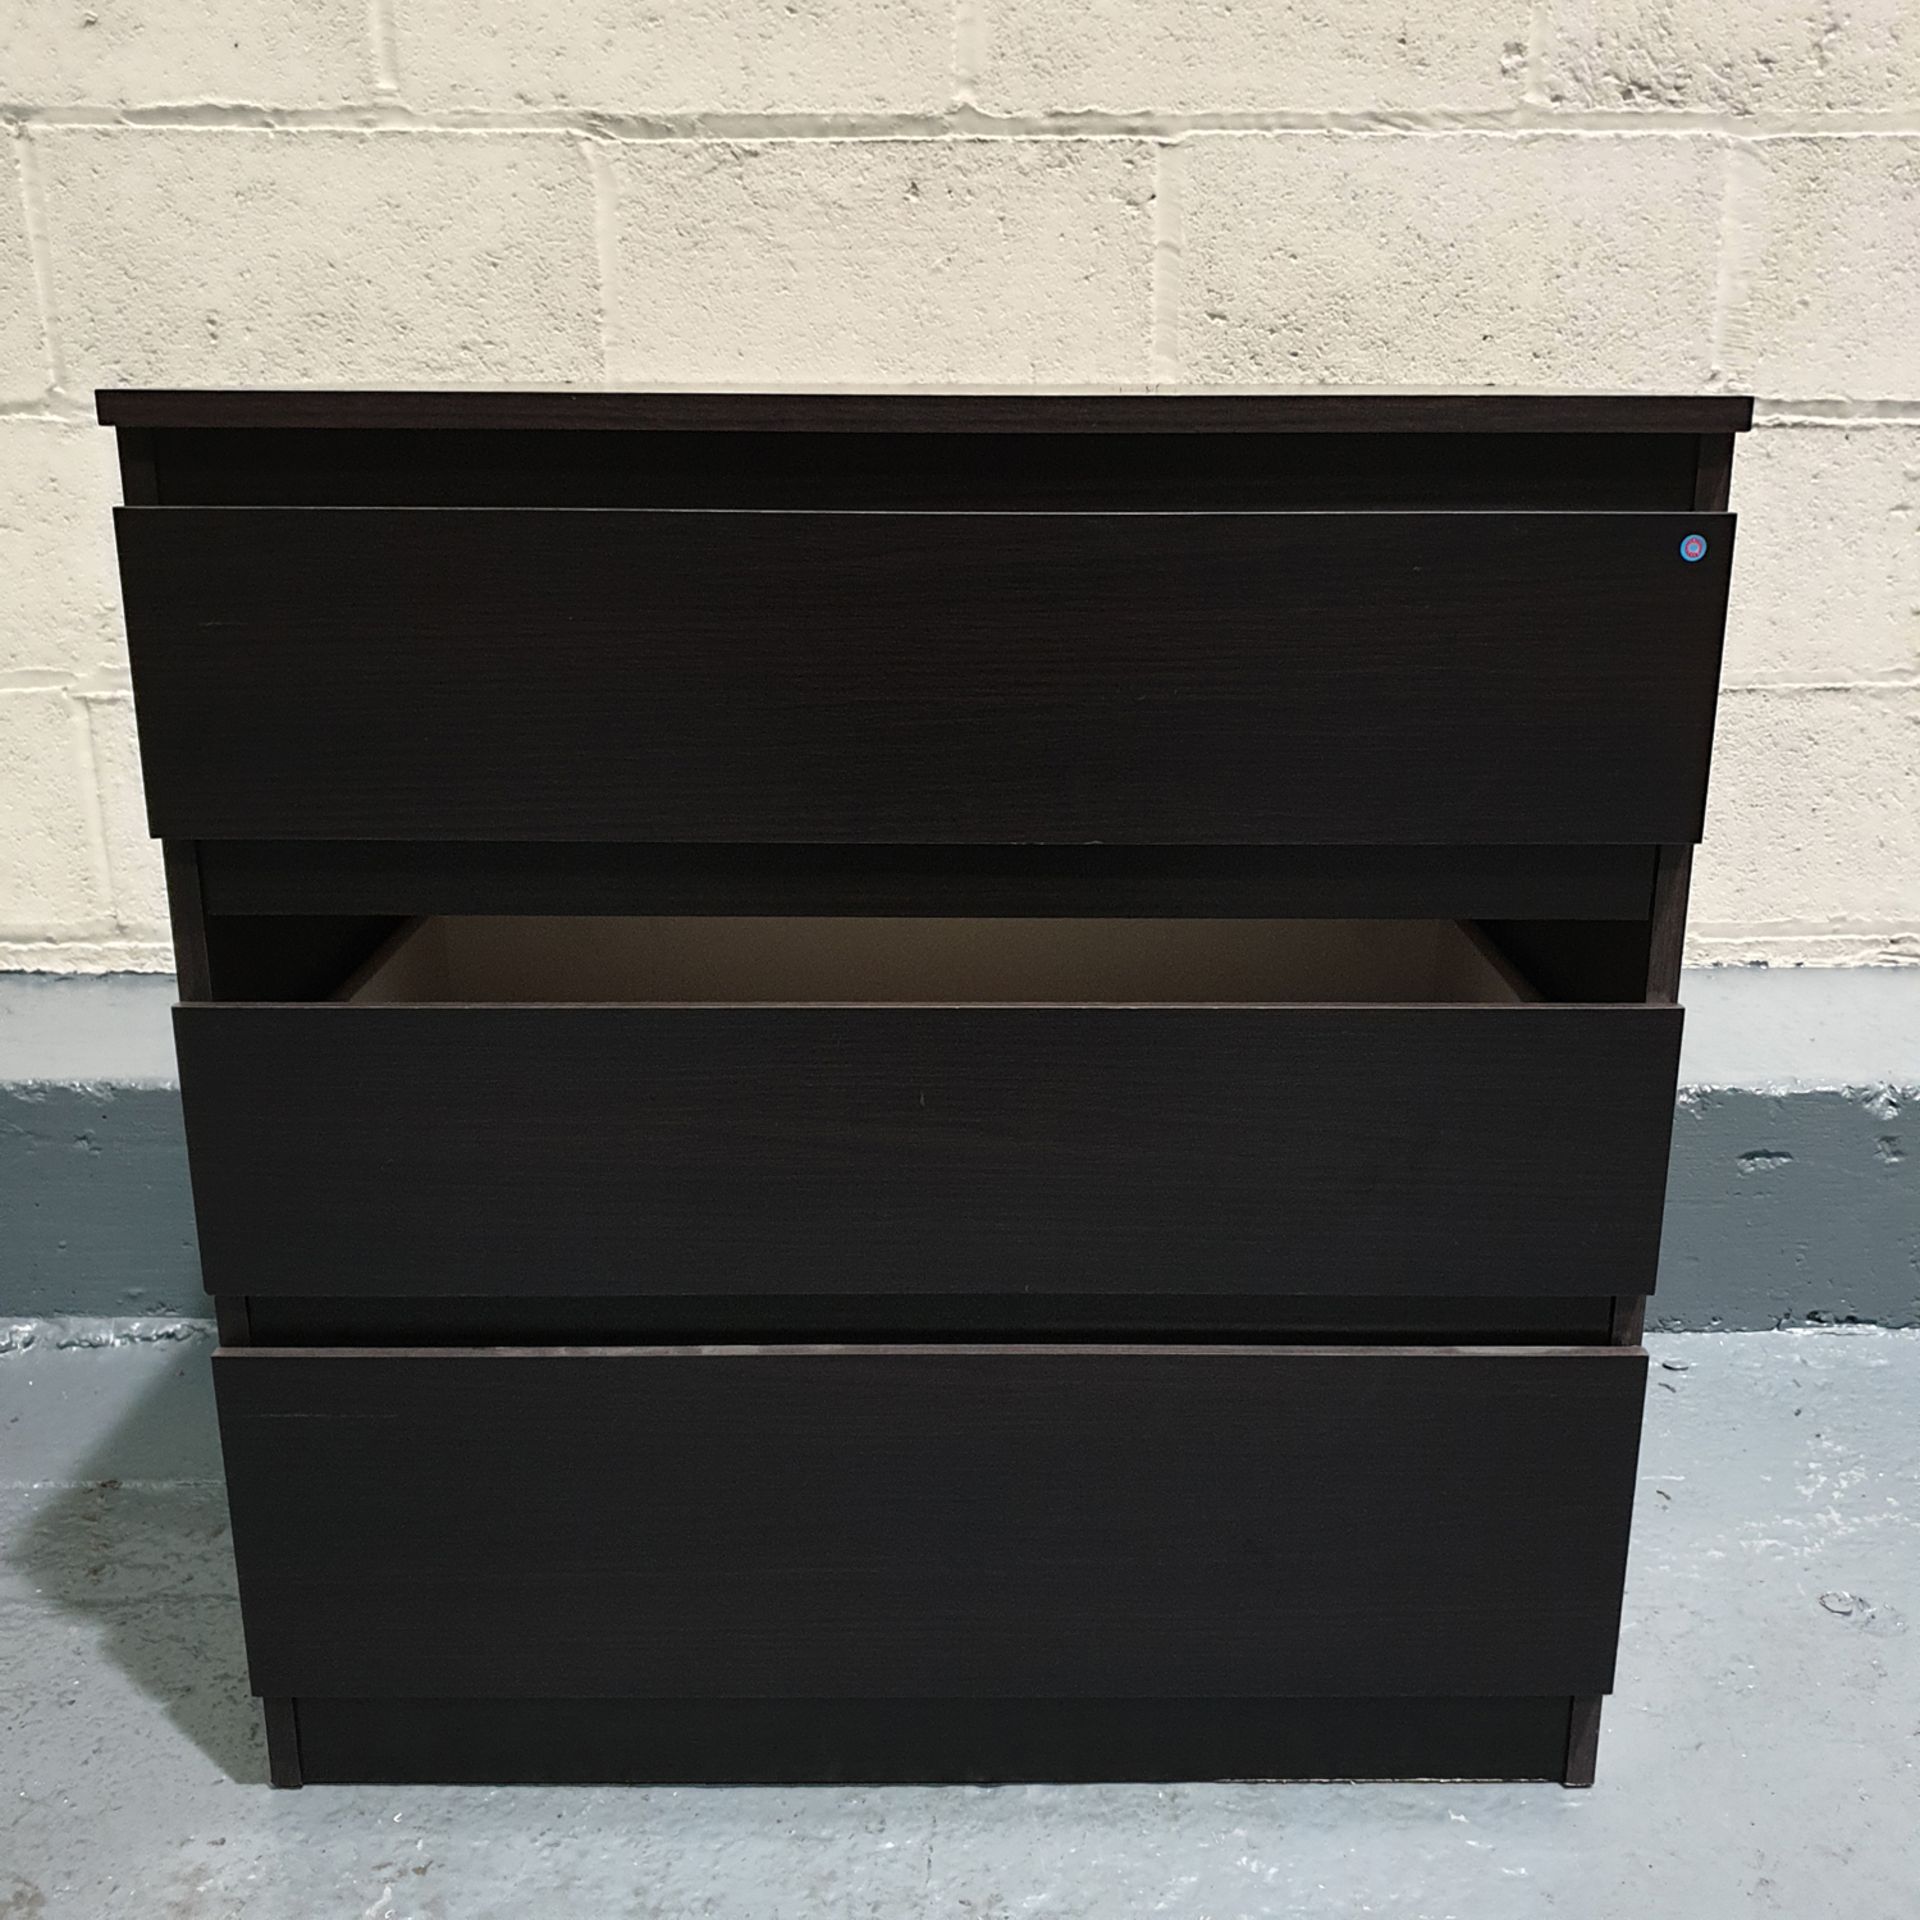 Set of Drawers. Approx Dimensions 700mm x 400mm x 710mm High. - Image 2 of 5